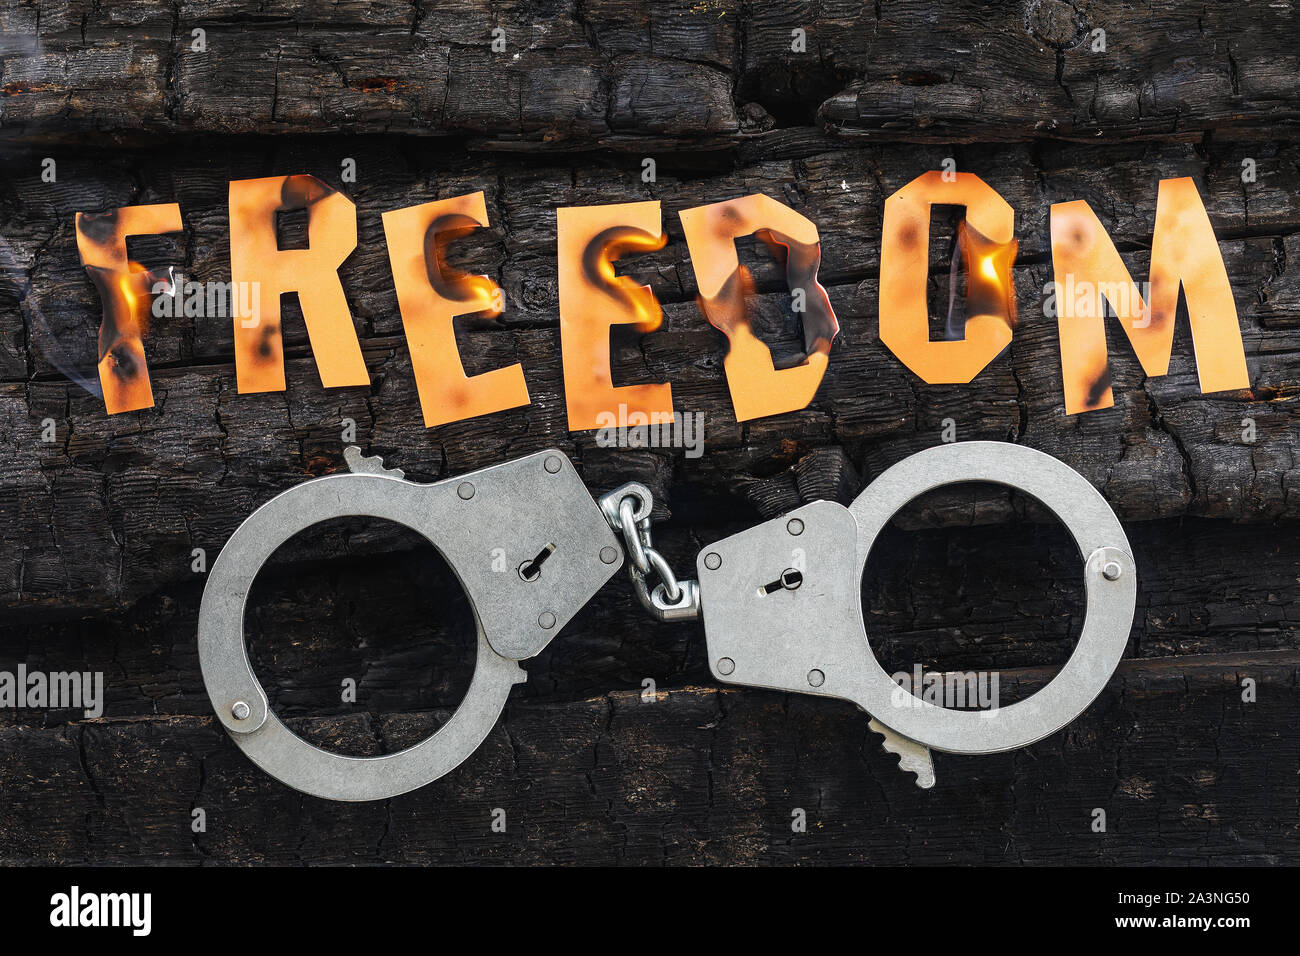 The word freedom burns, and handcuffs lie nearby. Burning letters made of paper. Concept on the topic of hopelessness and lack of trust in justice Stock Photo